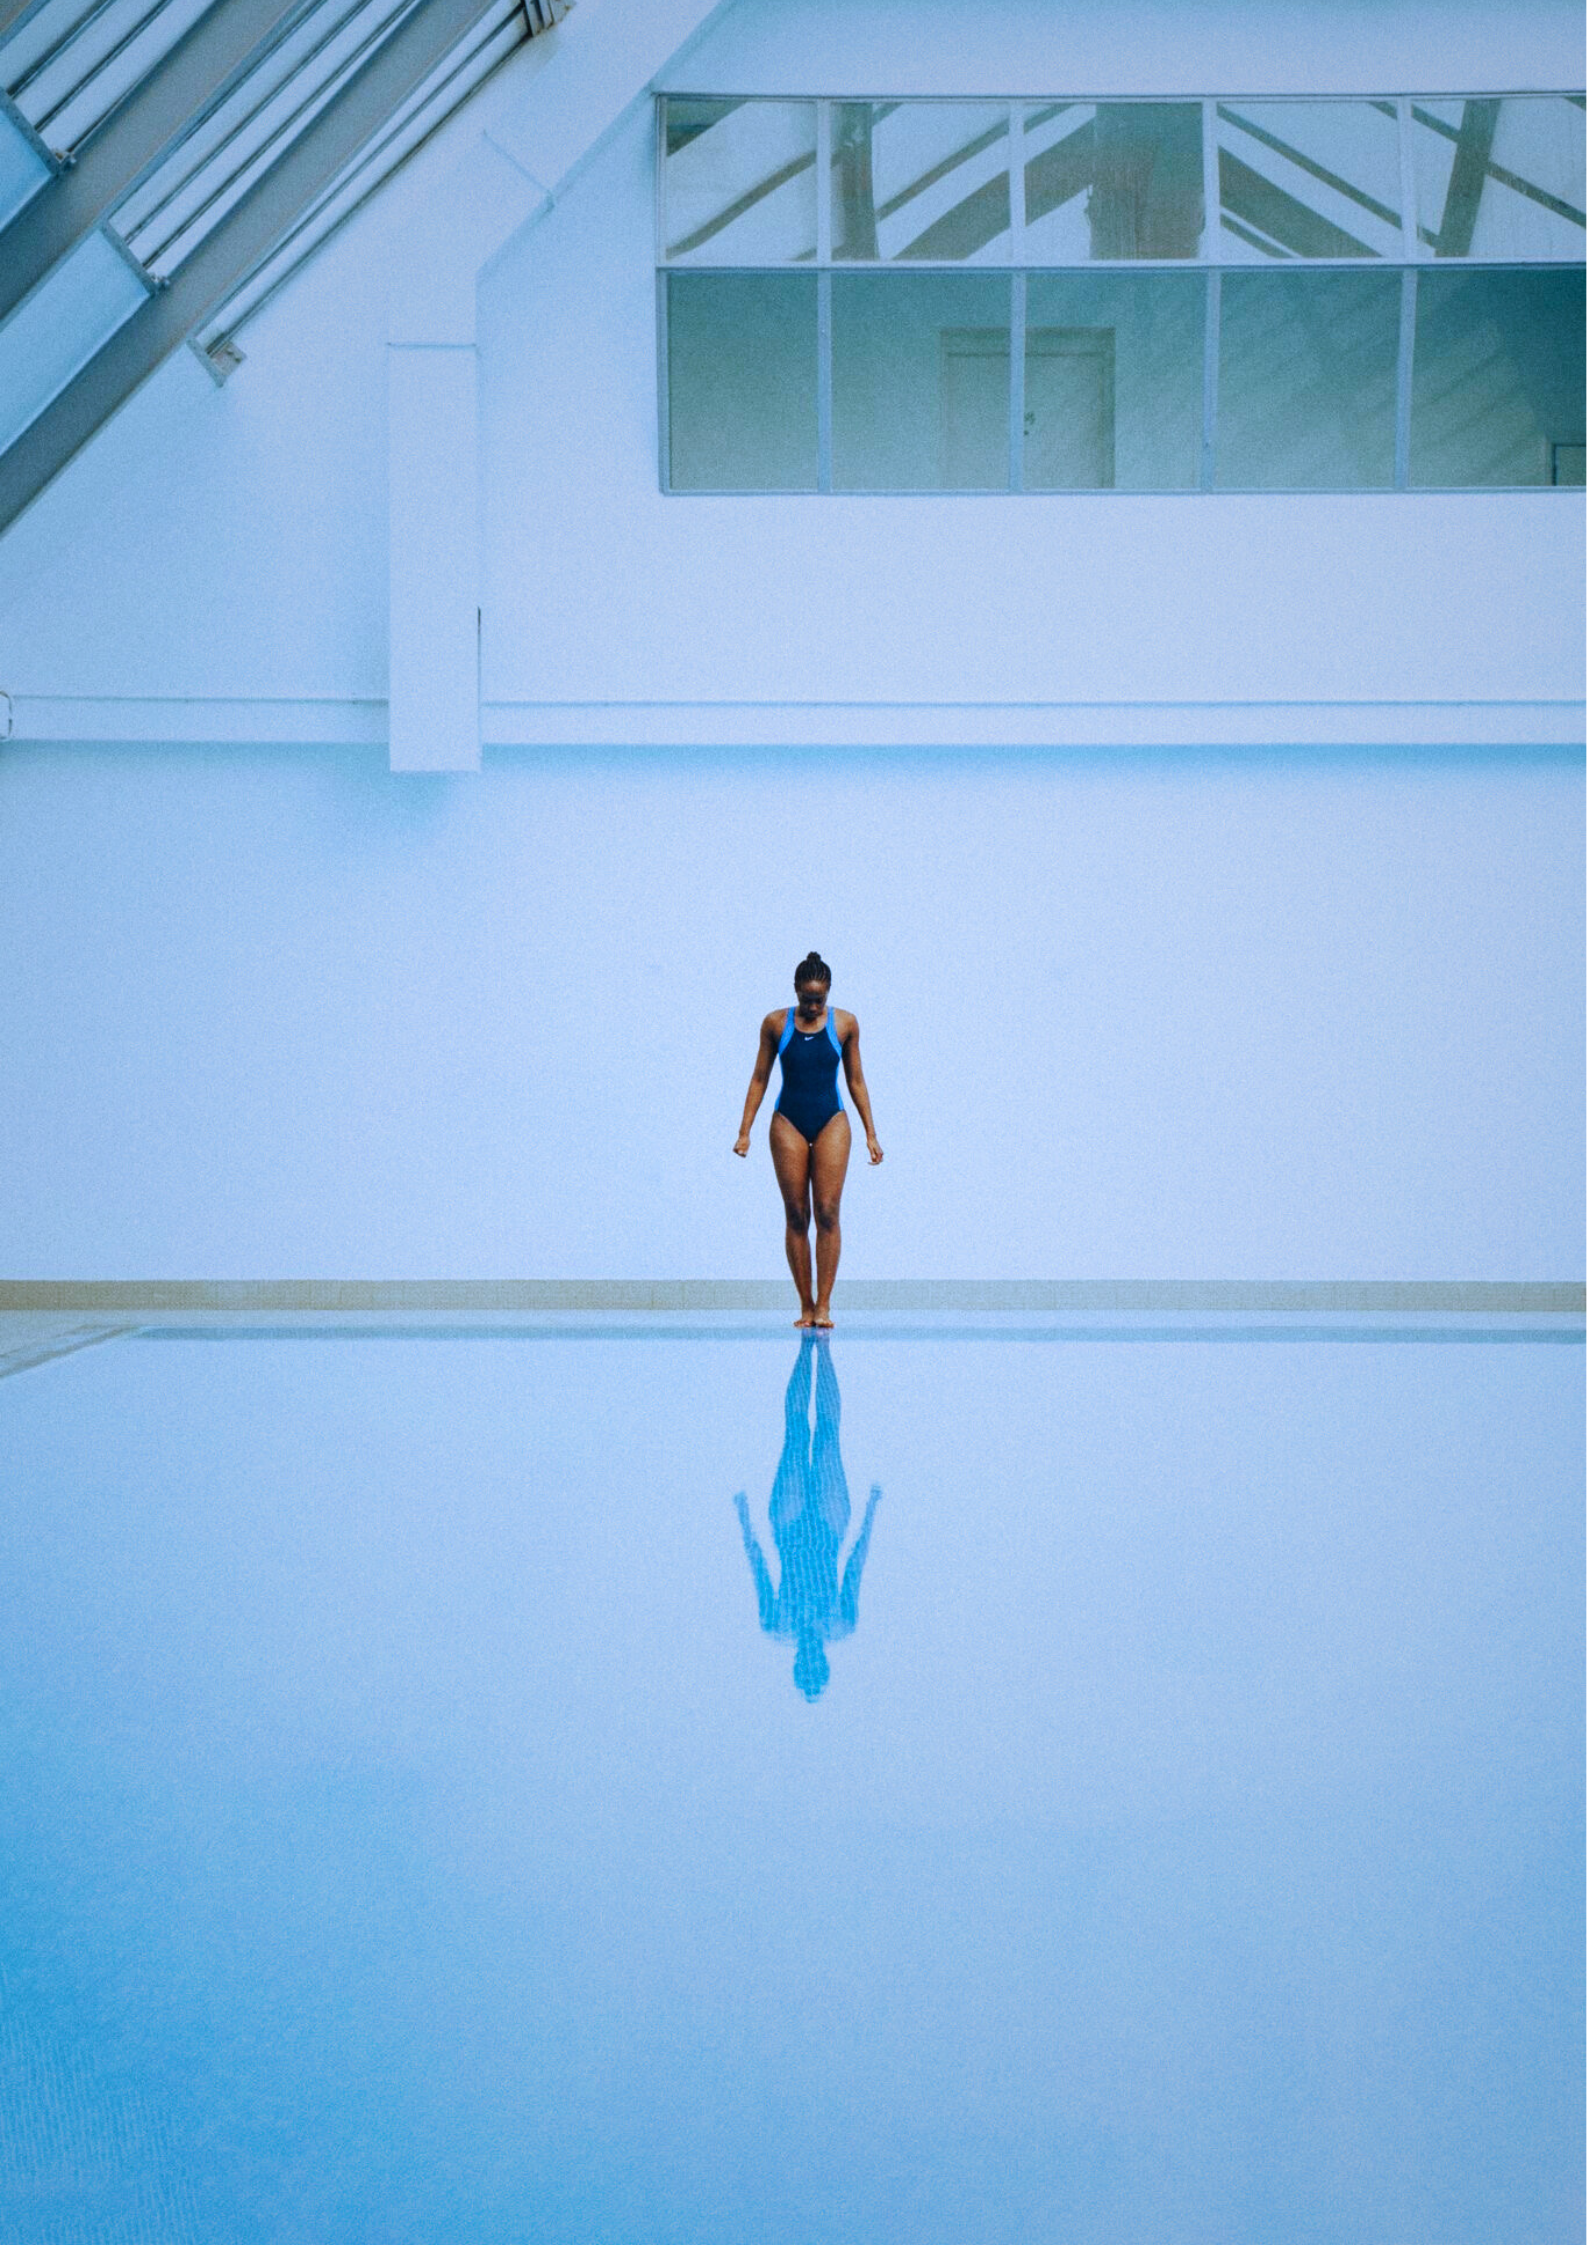 A Black woman looking down at a body of water in a public pool, about to dip her toes in.